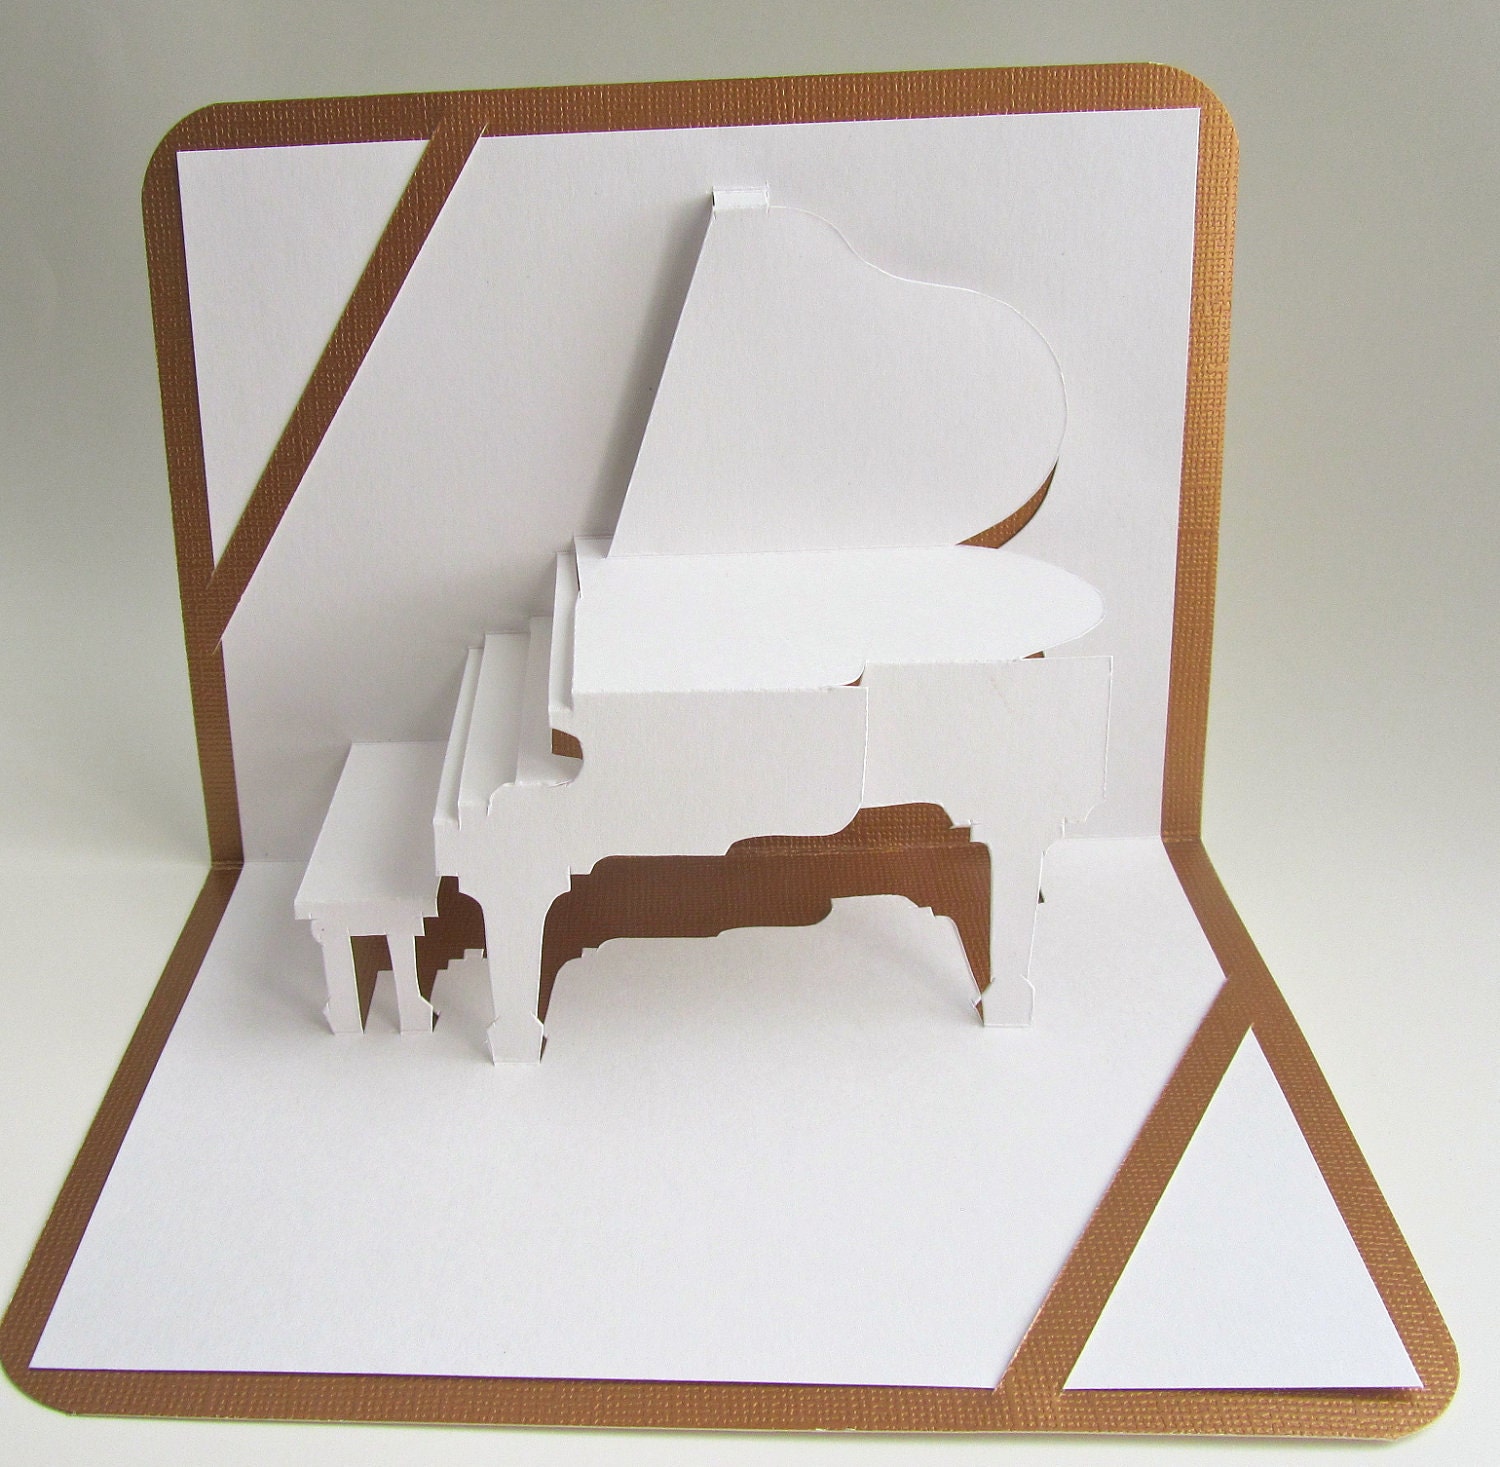 GRAND PIANO 3D Pop Up CARD Origamic Architecture Home Decoration Handmade Handcut in White and Bright Shimmery Gold One Of A Kind - BoldFolds